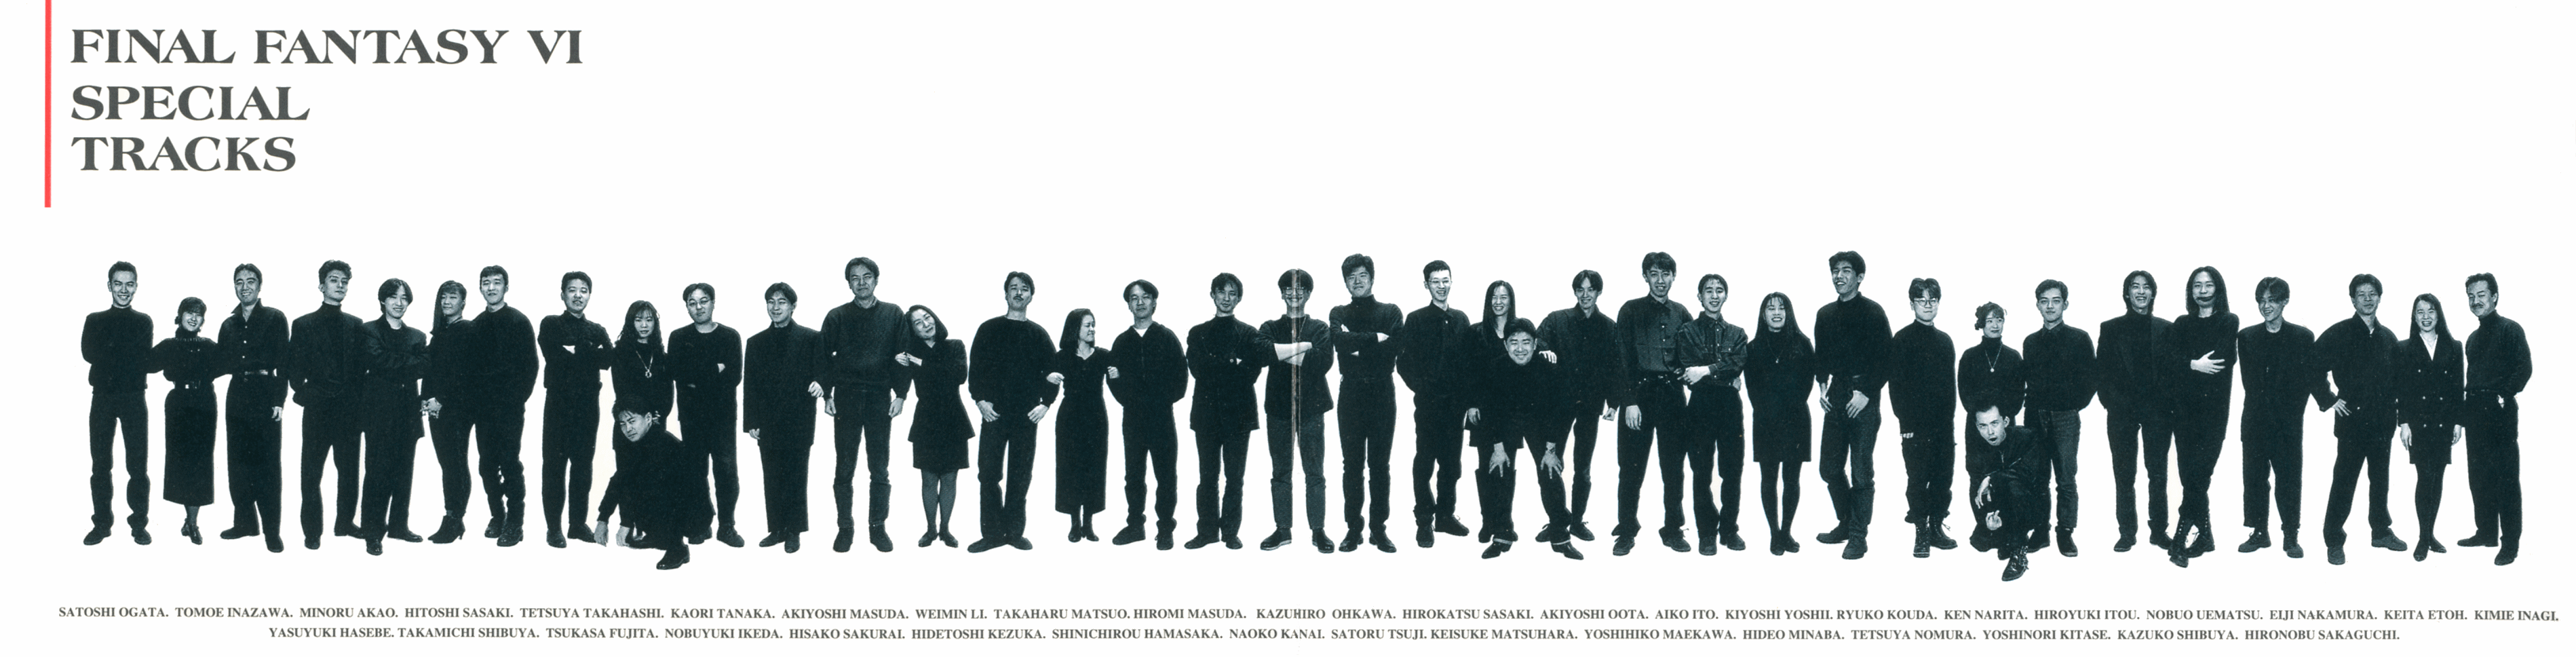 A photo of the Final Fantasy VI staff. Takahashi is fifth from the left, and Saga is next to him. (Photo: Square Enix / Final Fantasy Wiki)